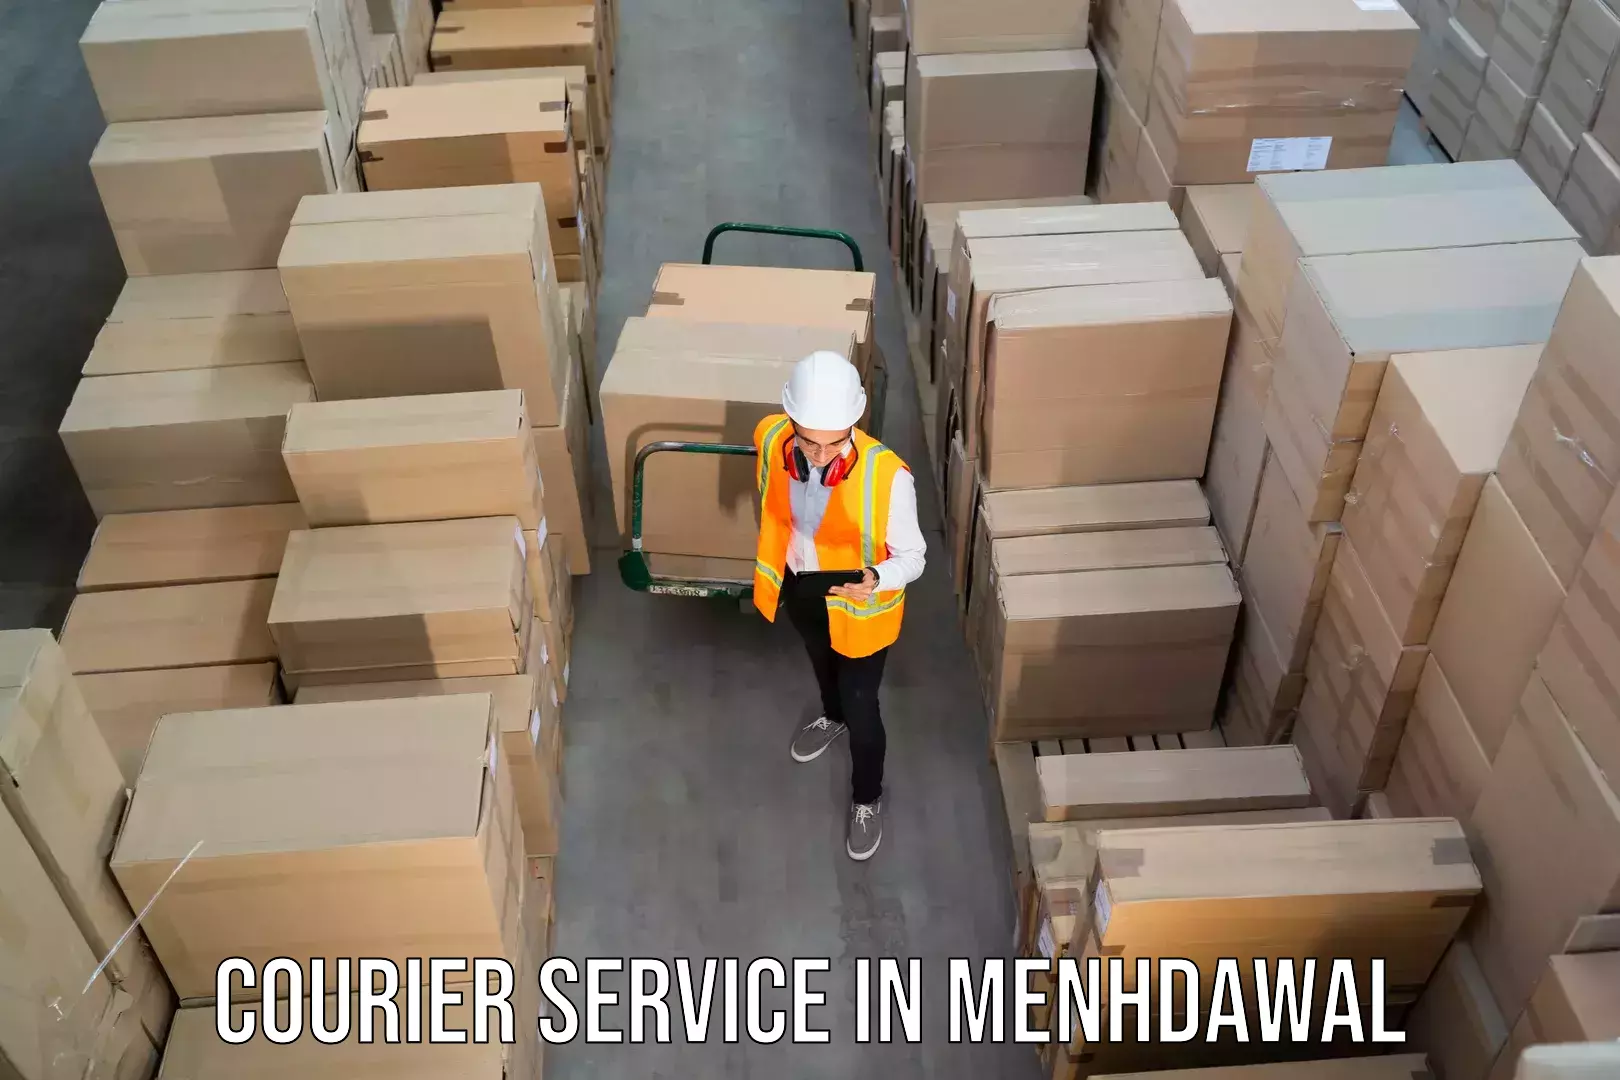 Business shipping needs in Menhdawal